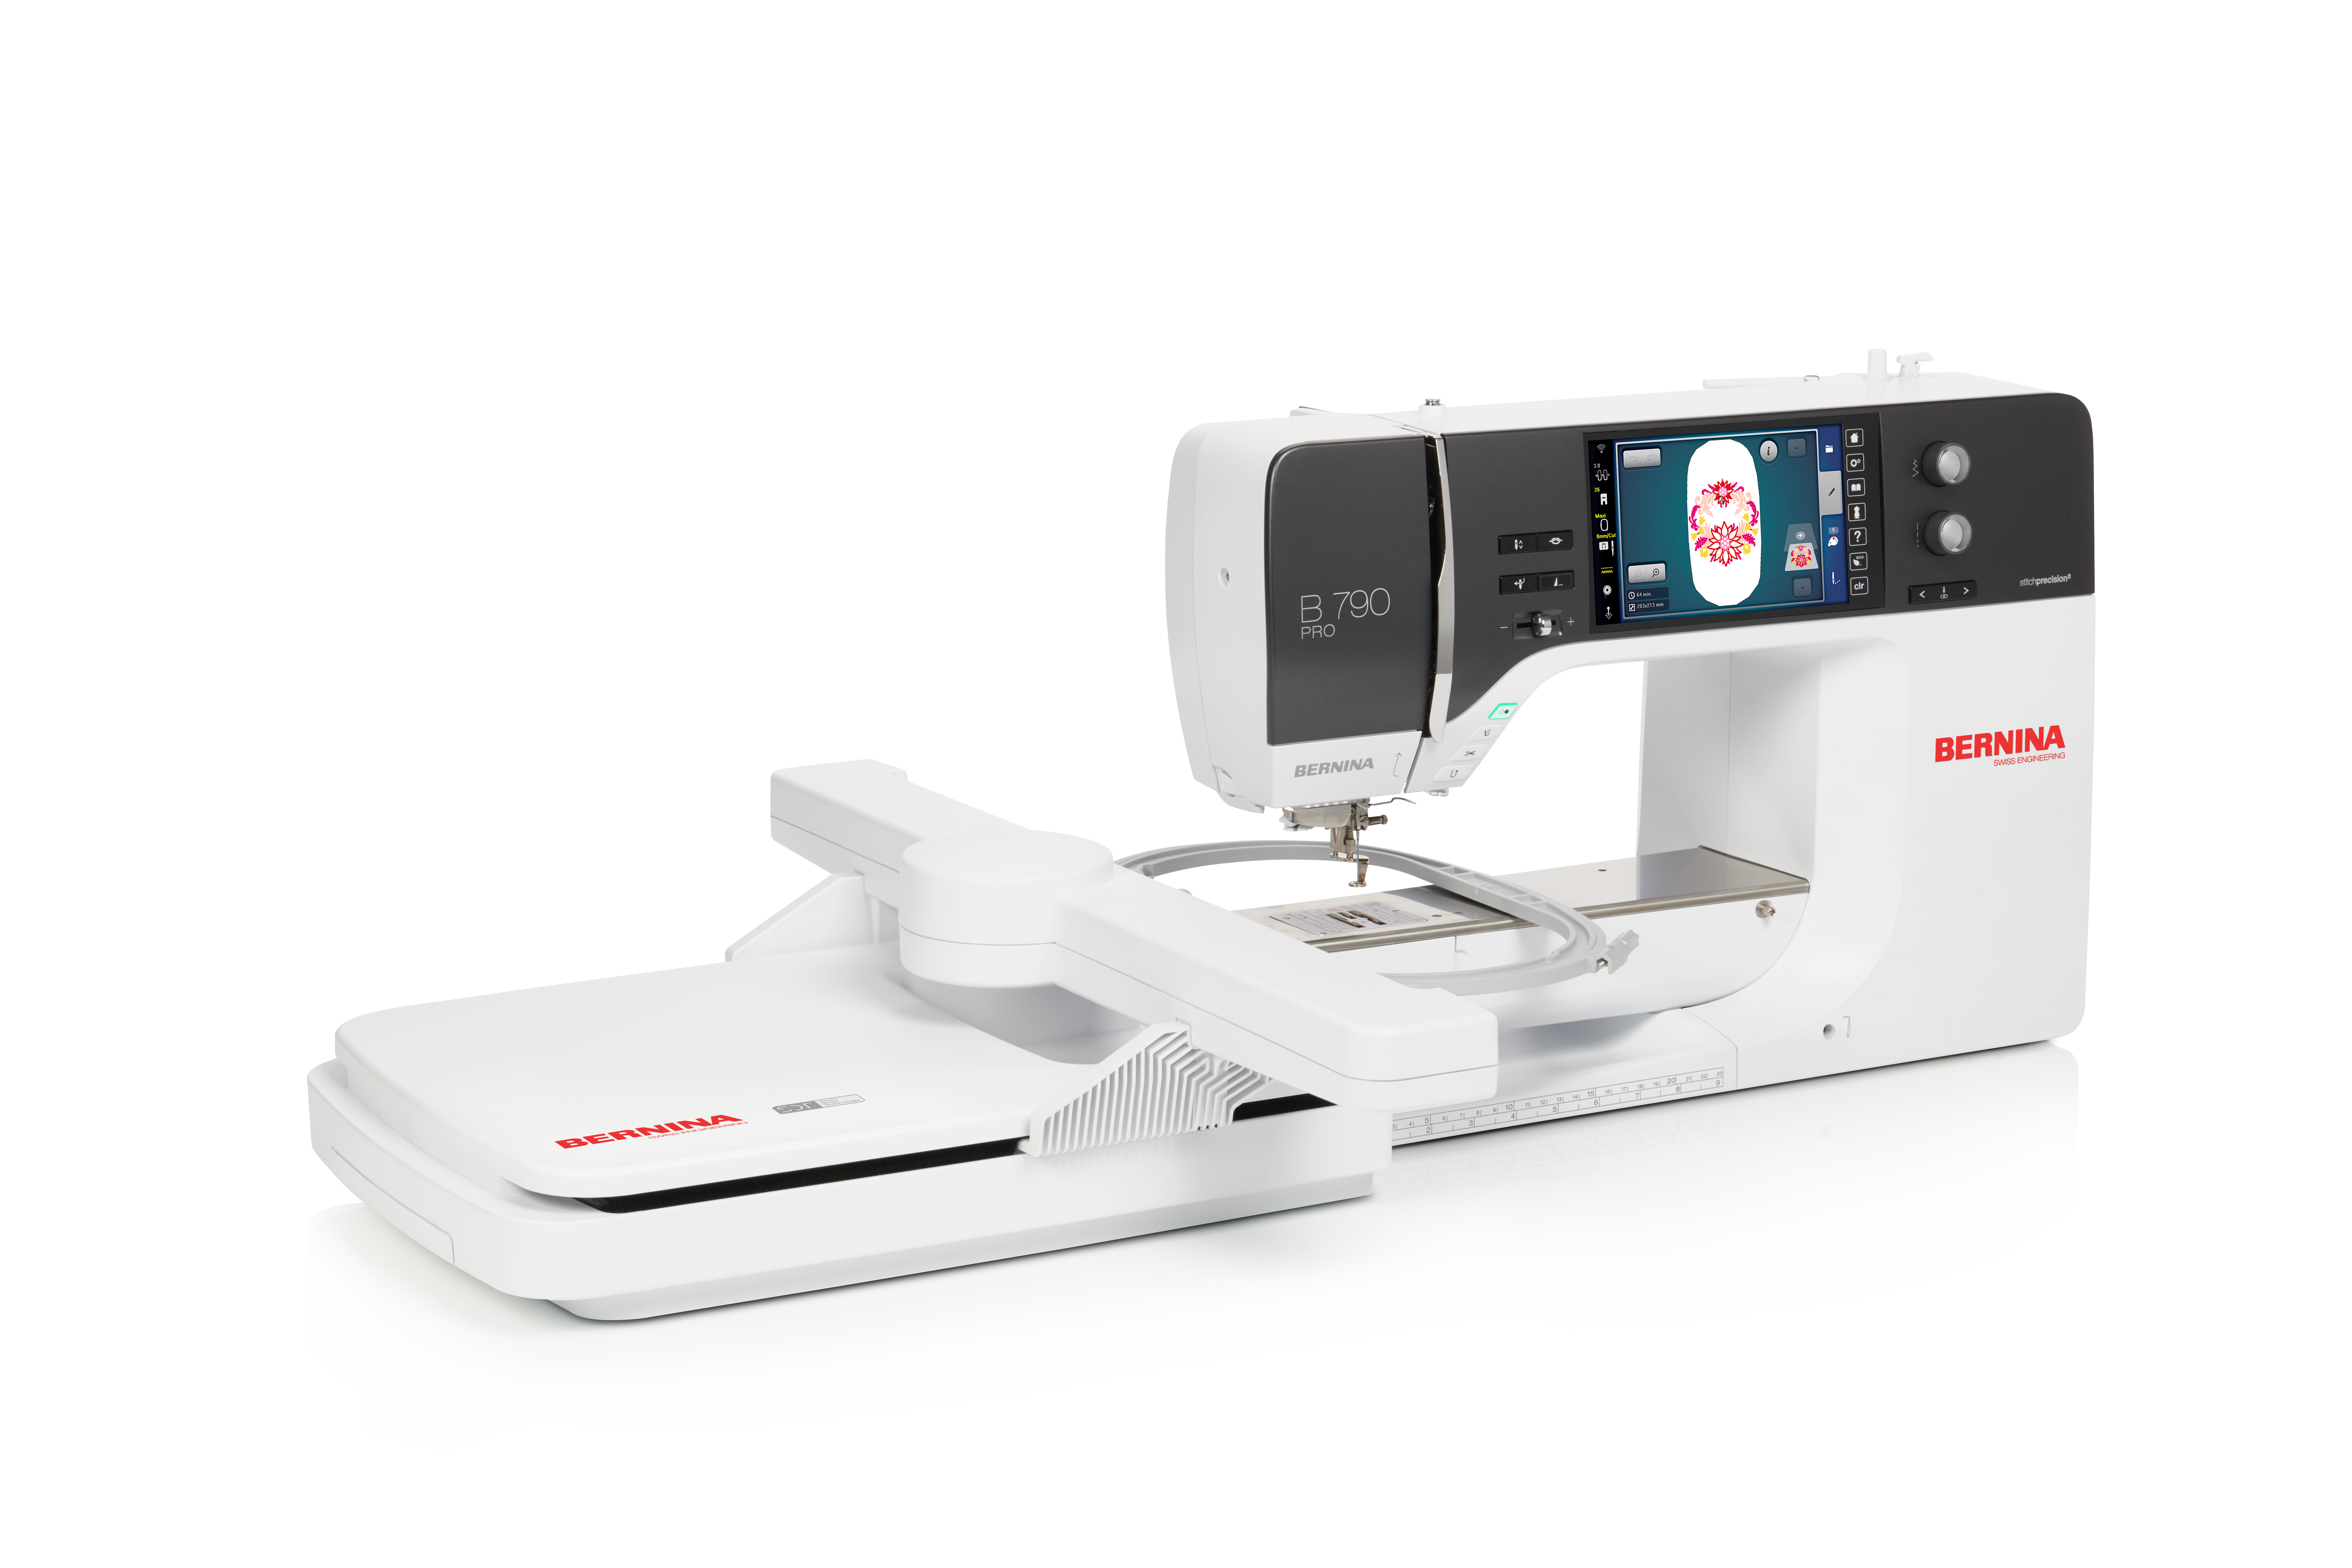 Bernina 790 Pro Sewing, Embroidery and quilting machine